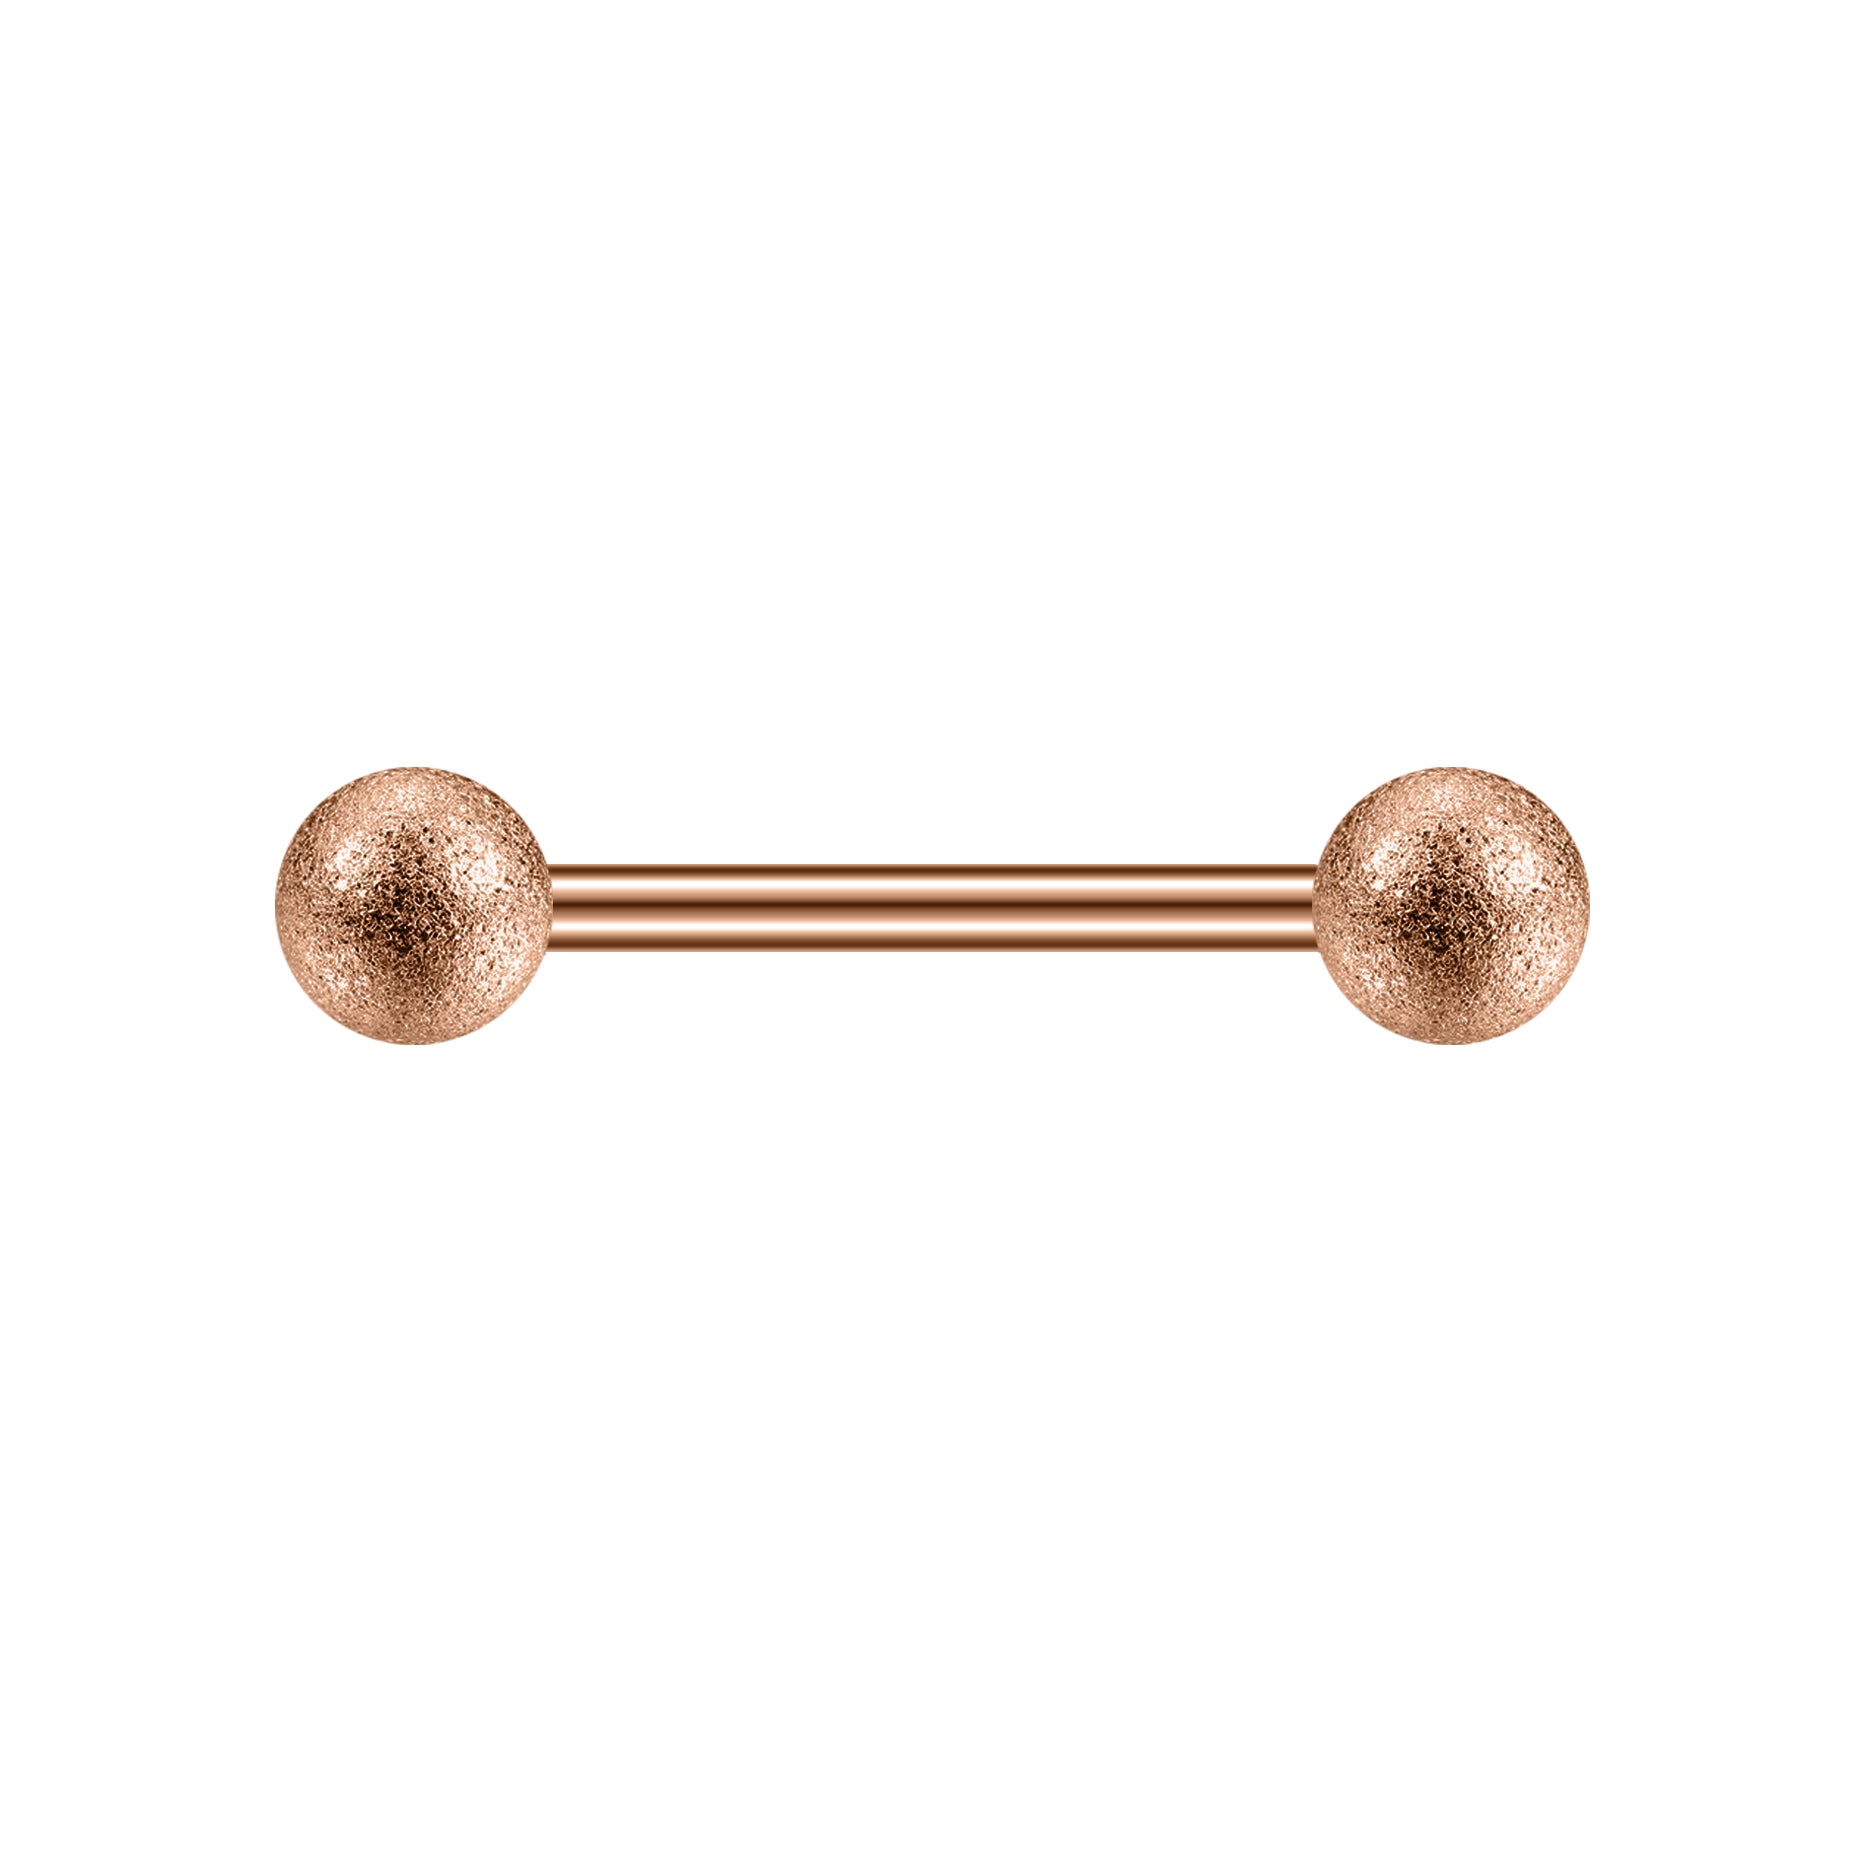 2pcs 14G Simple Nipple Ring Rose Gold Frosted Ball Nipple Piercing